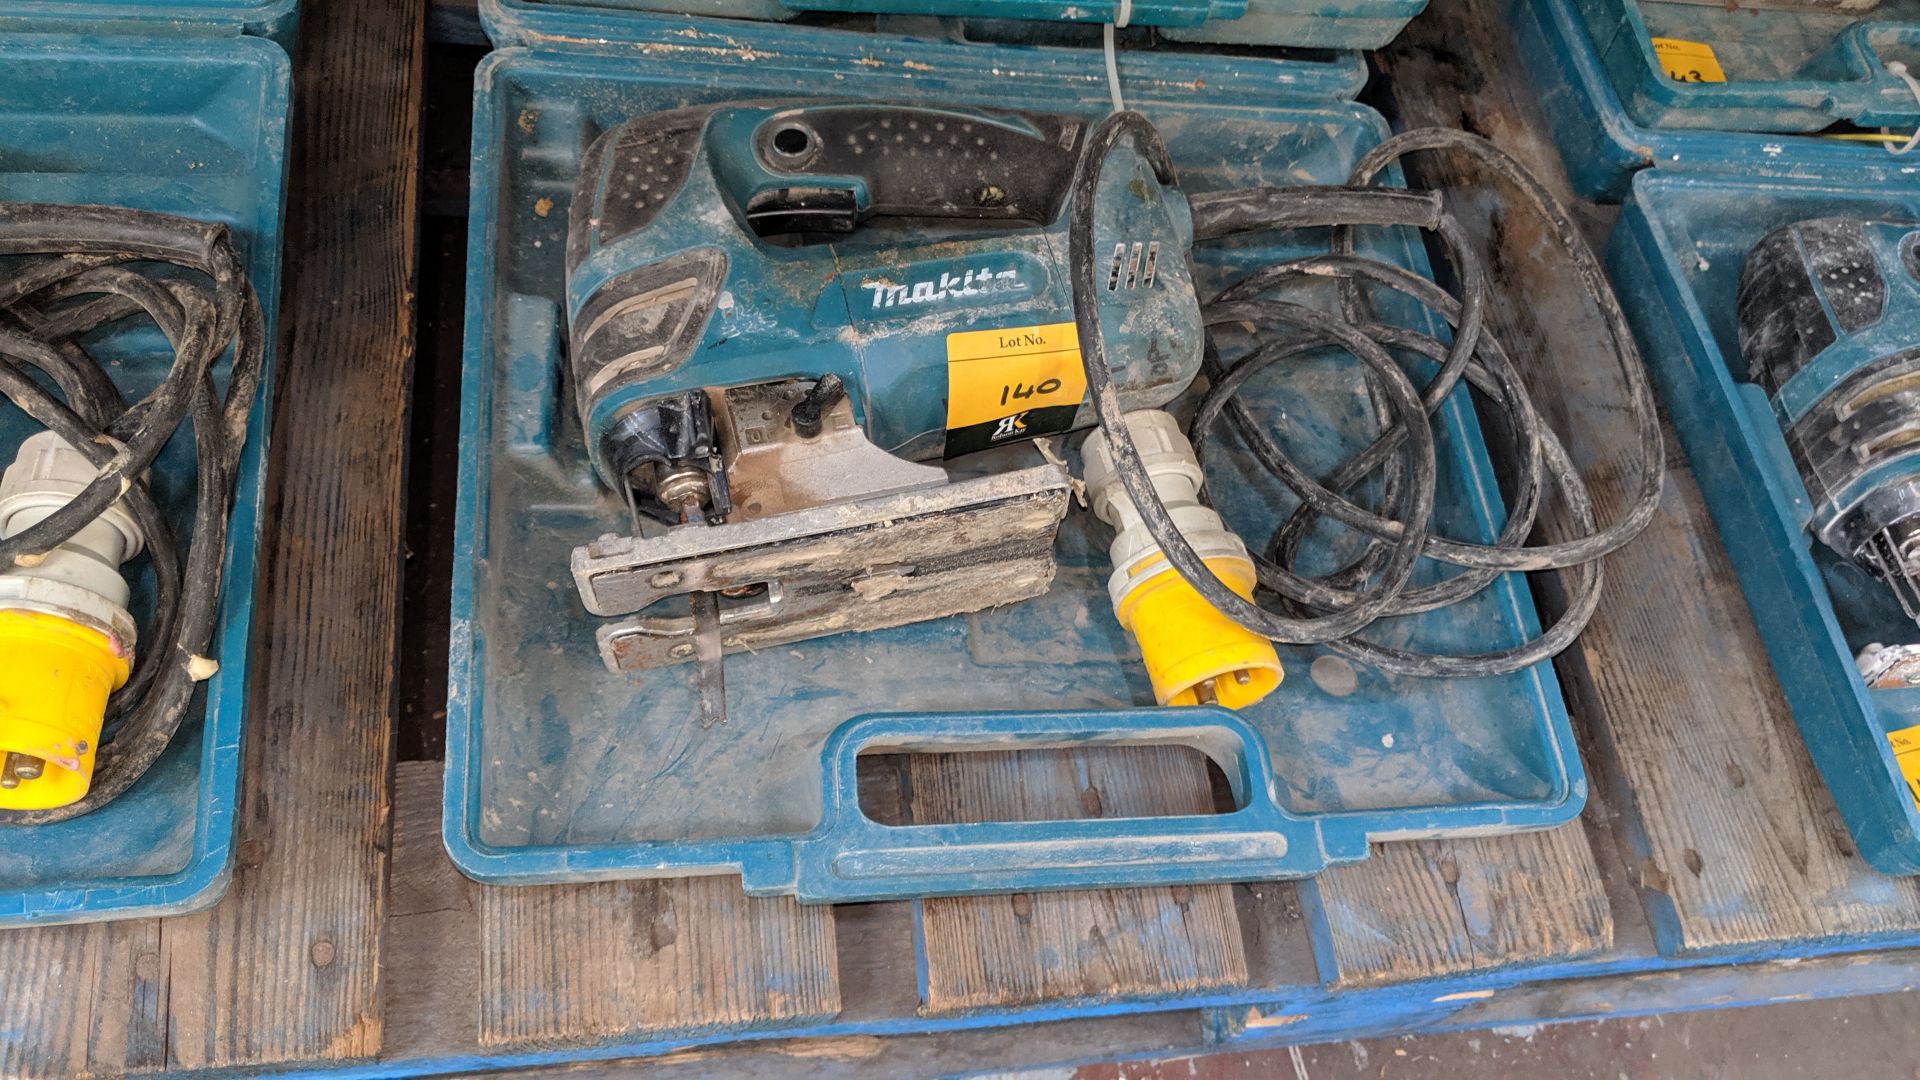 Makita 110V jigsaw in case model 4350FCT IMPORTANT: Please remember goods successfully bid upon must